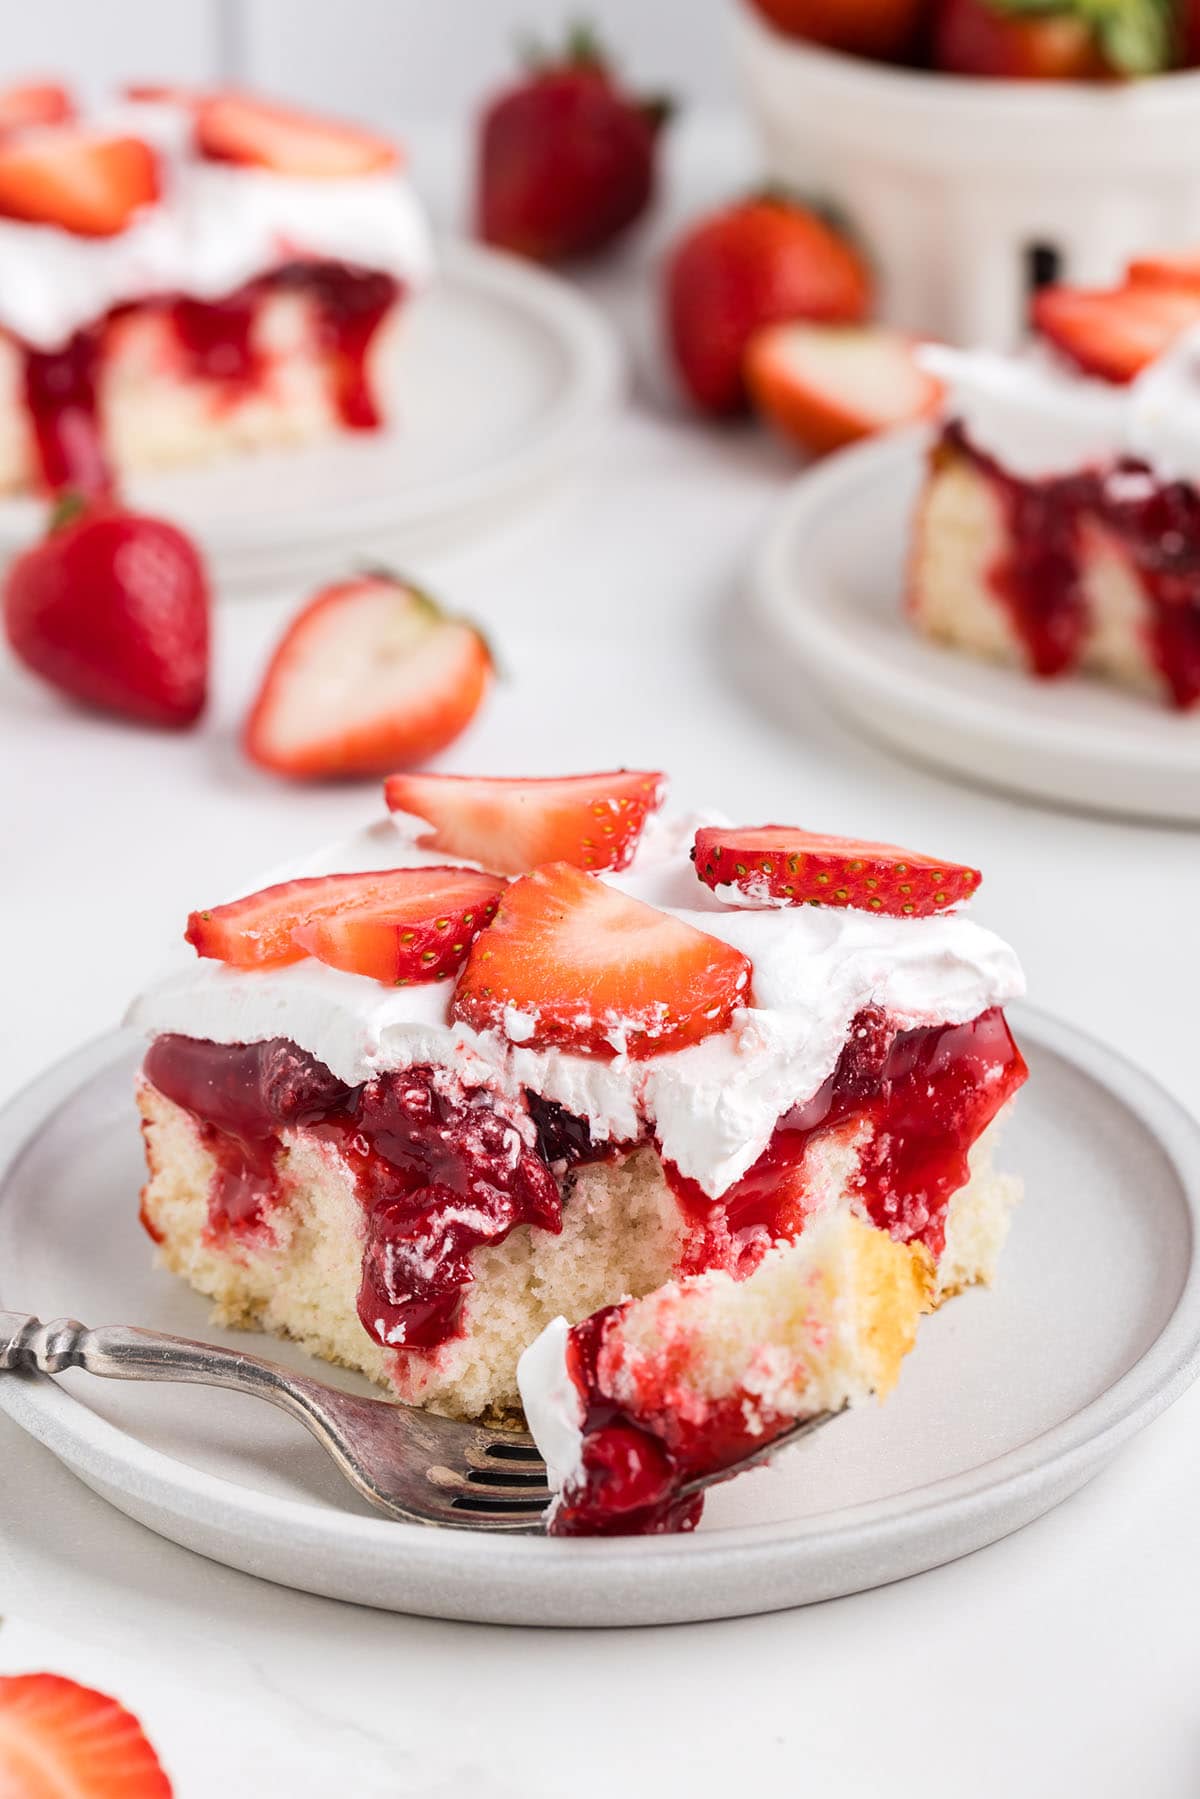 eating a slice of Strawberry Shortcake Poke Cake using a fork on a plate.